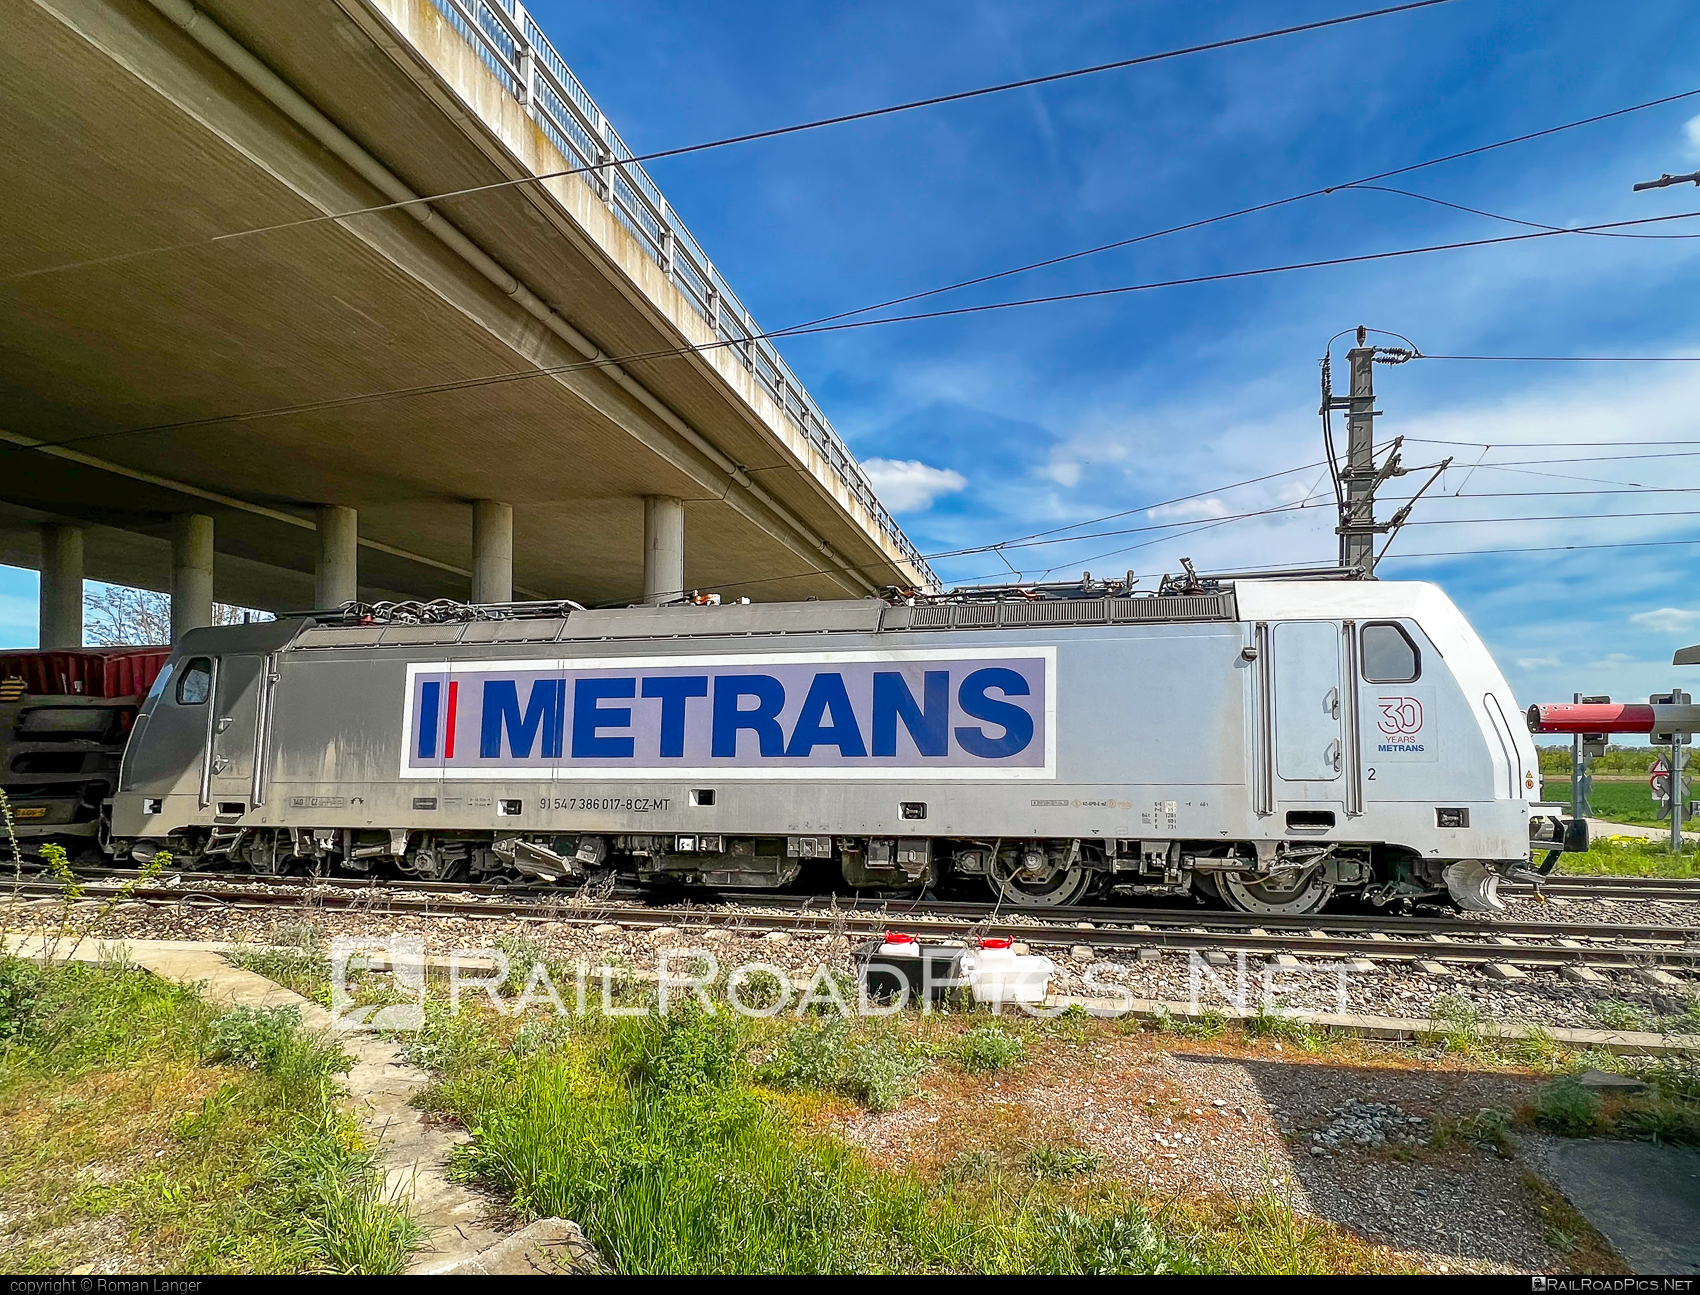 Bombardier TRAXX F140 MS - 386 017-8 operated by METRANS Rail s.r.o. #bombardier #bombardiertraxx #crash #damage #hhla #metrans #metransrail #traxx #traxxf140 #traxxf140ms